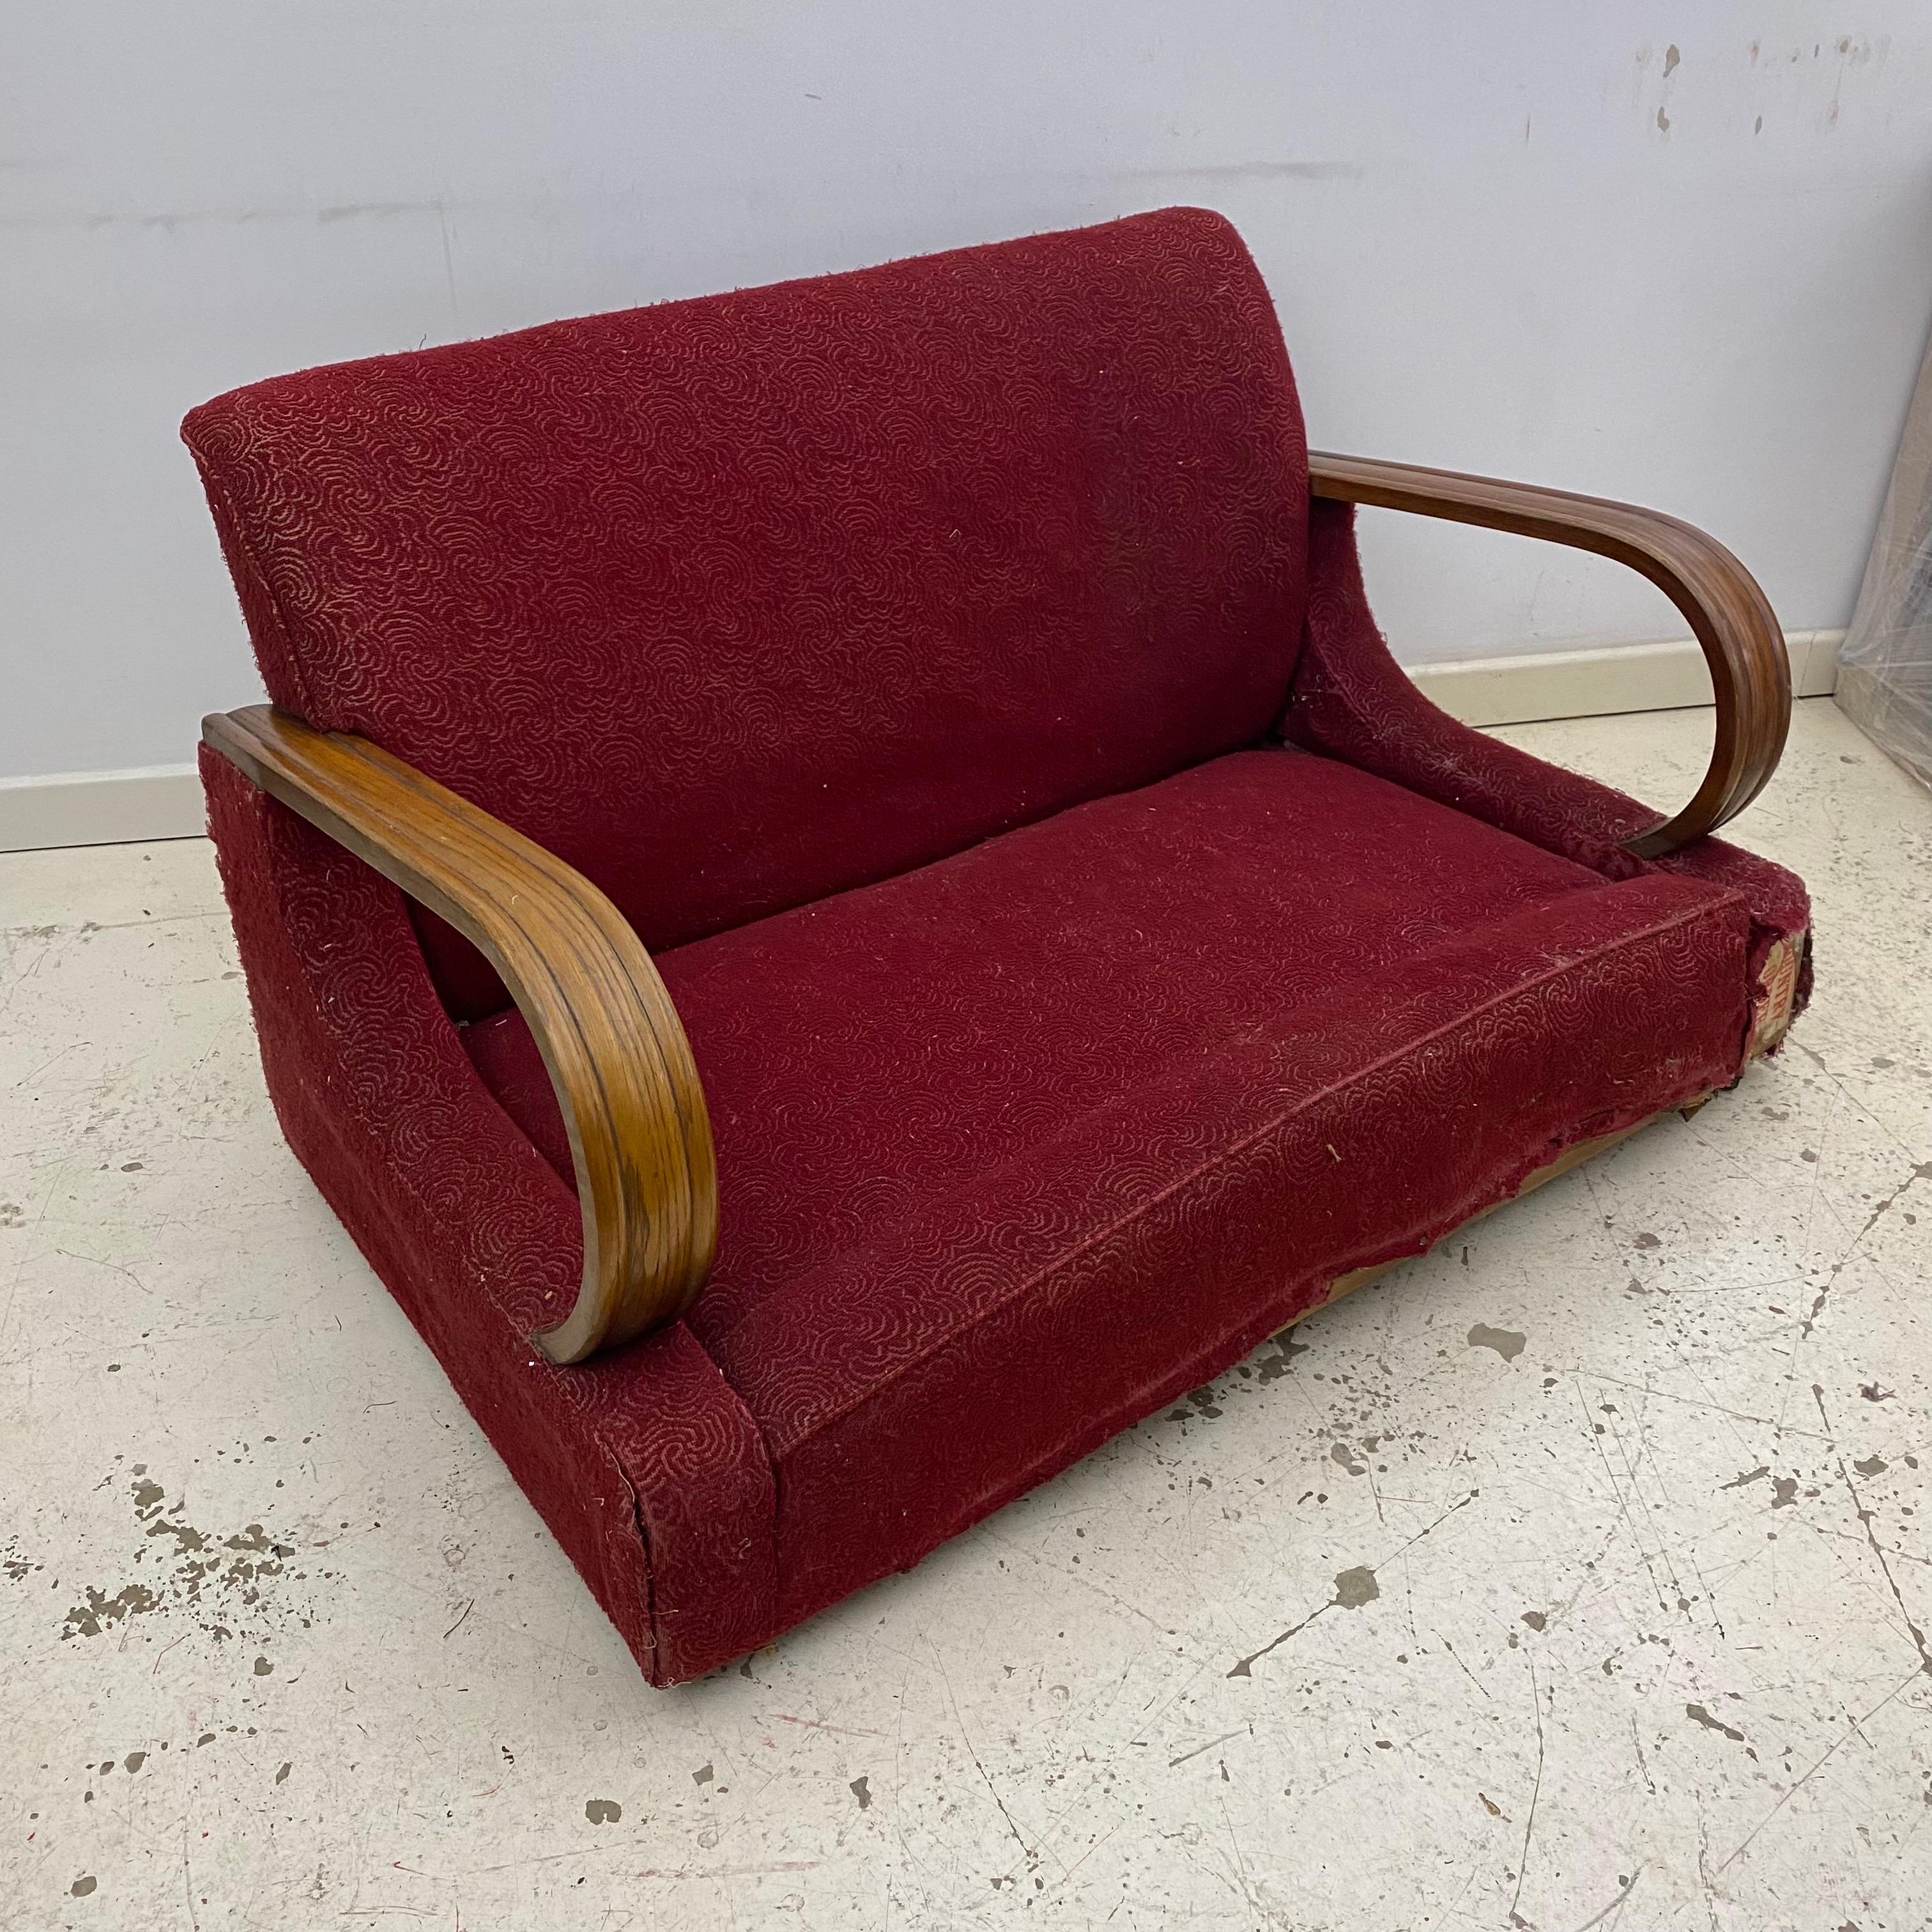 Art Deco 1940s Red Two Seater Distressed Sofa Restoration Project As Seen Poirot In Distressed Condition For Sale In London, GB